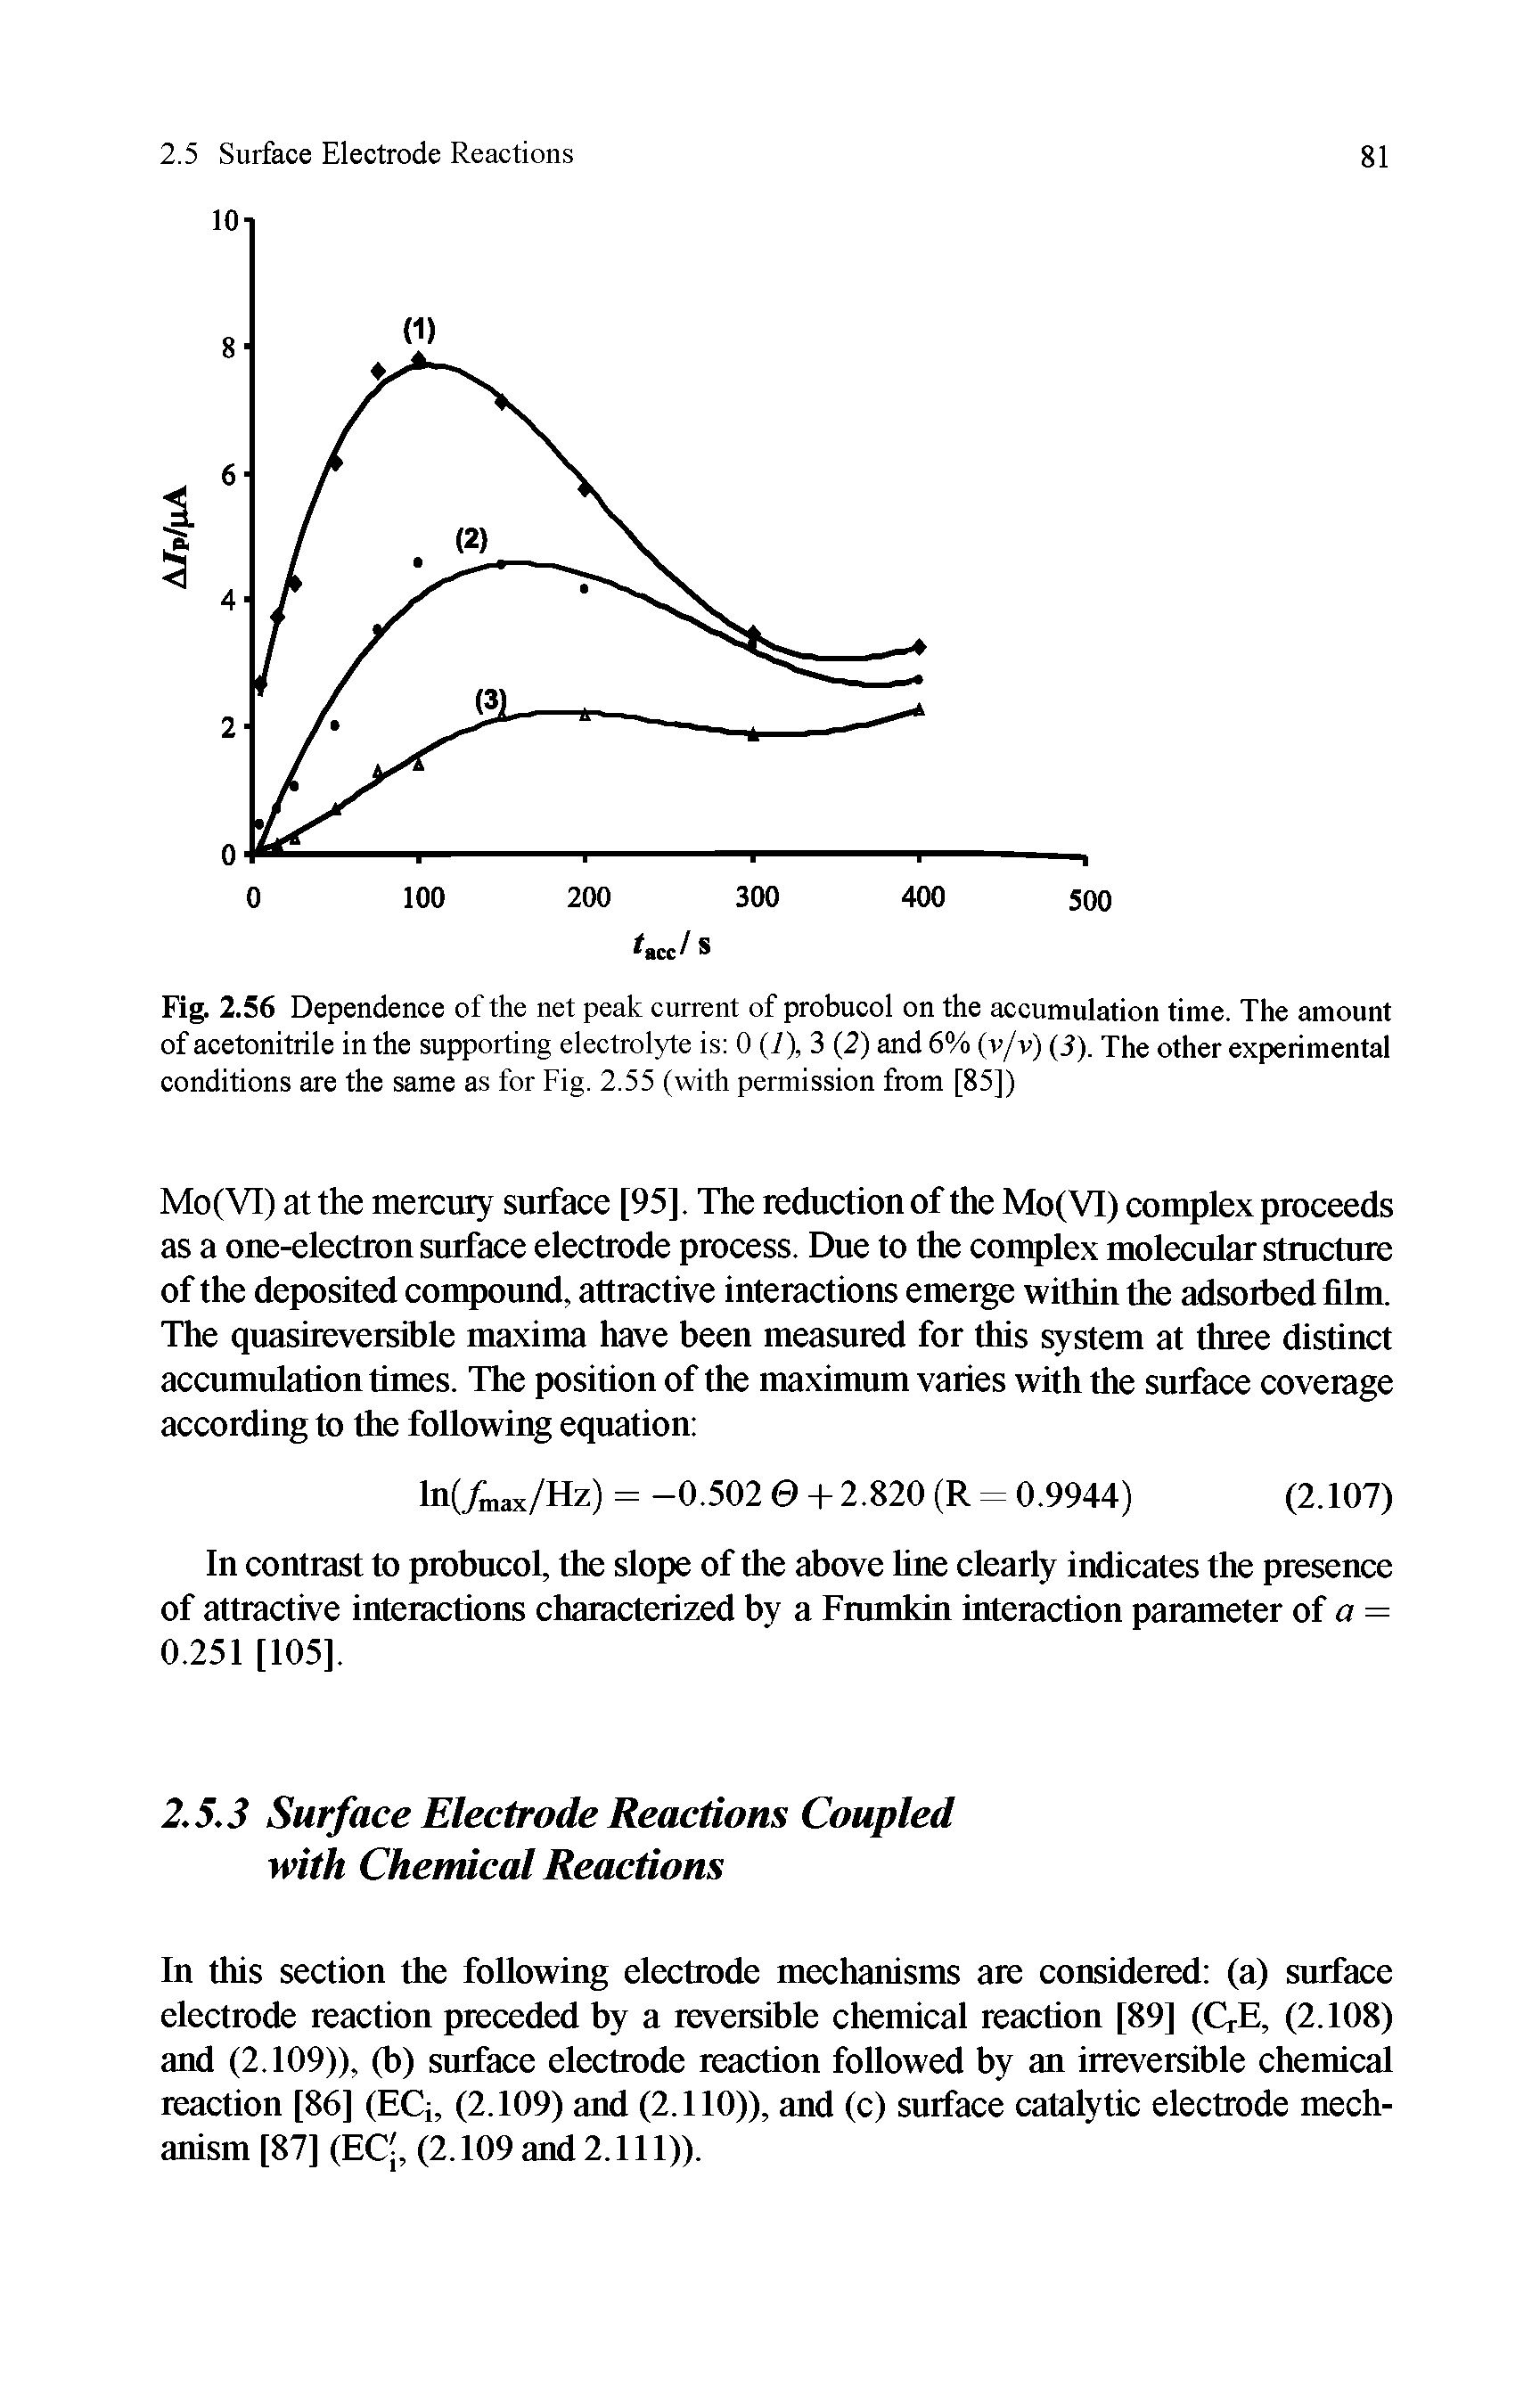 Fig. 2.56 Dependence of the net peak current of probucol on the accumulation time. The amount of acetonitrile in the supporting electrolyte is 0 (i), 3 (2) and 6% (v/v) (3). The other experimental conditions are the same as for Fig. 2.55 (with permission from [85])...